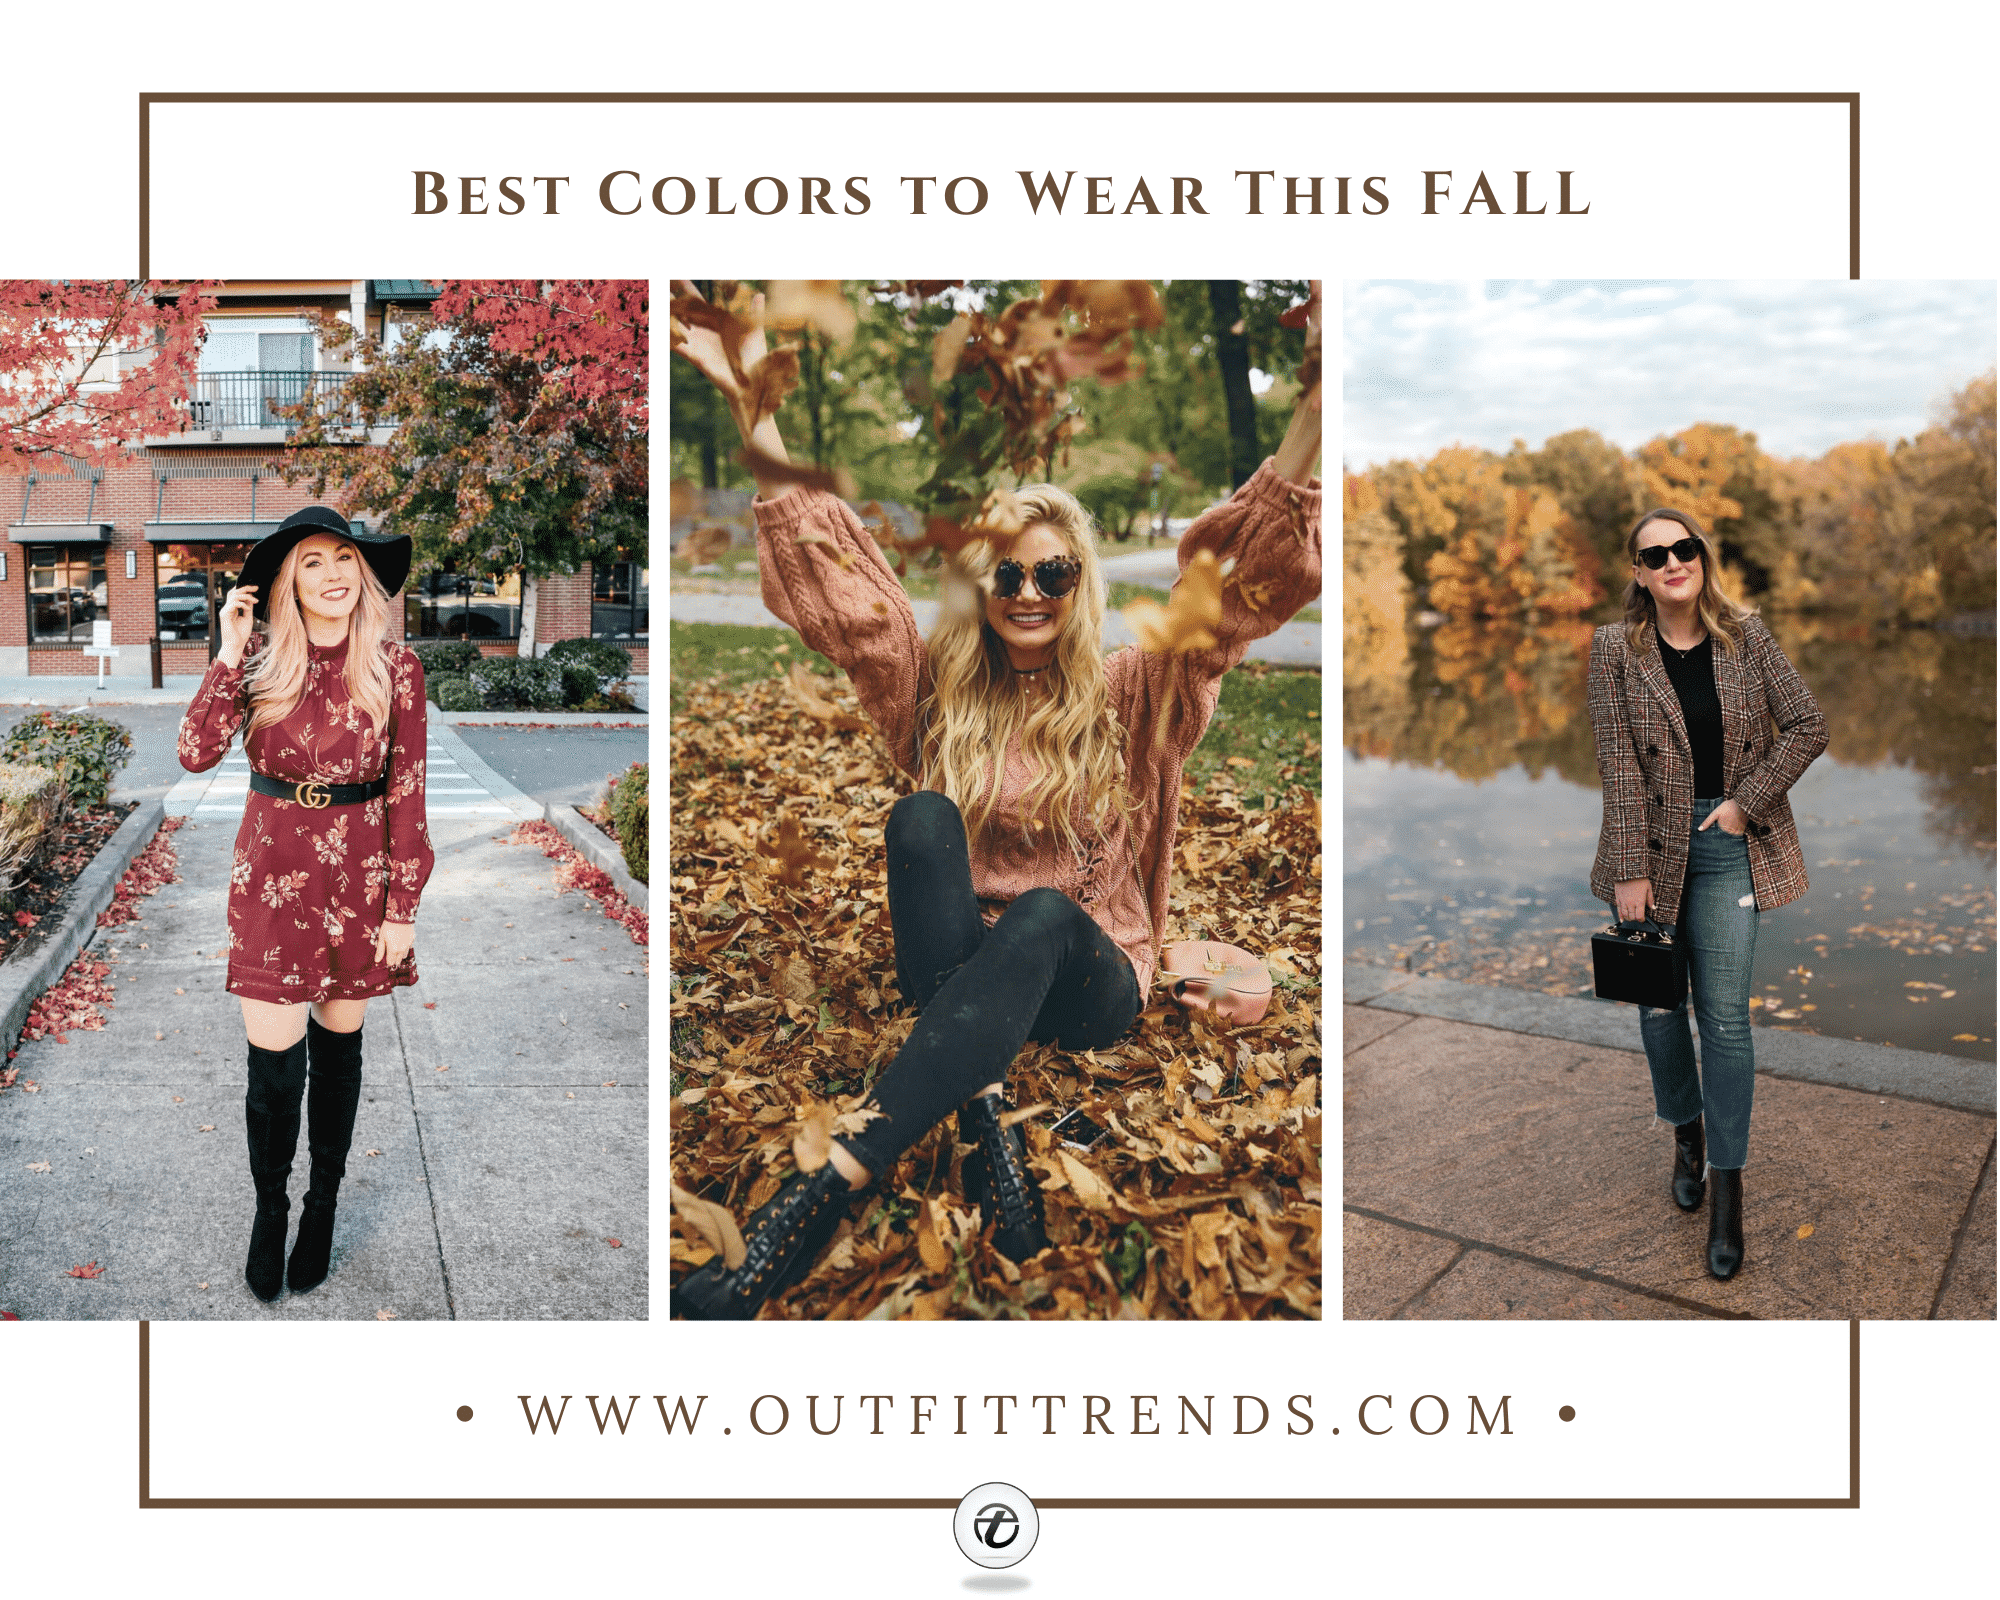 Women’s Fall Colors – 21 Best Colors to Wear this Fall